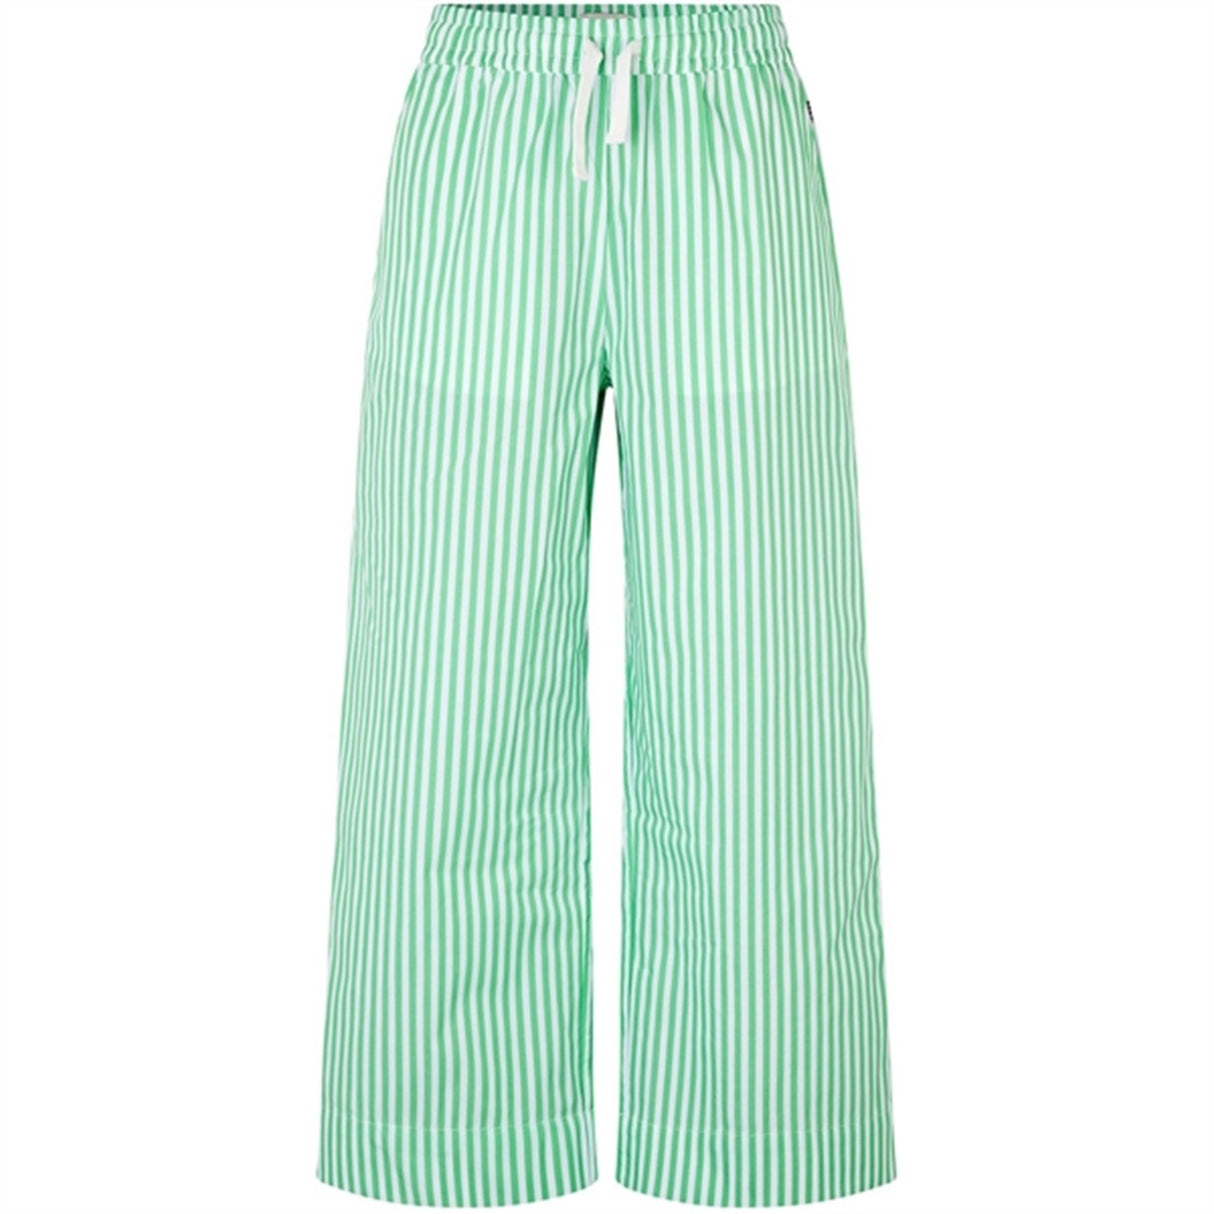 Mads Nørgaard Popla Pipa Pants Andean Toucan/Optical White